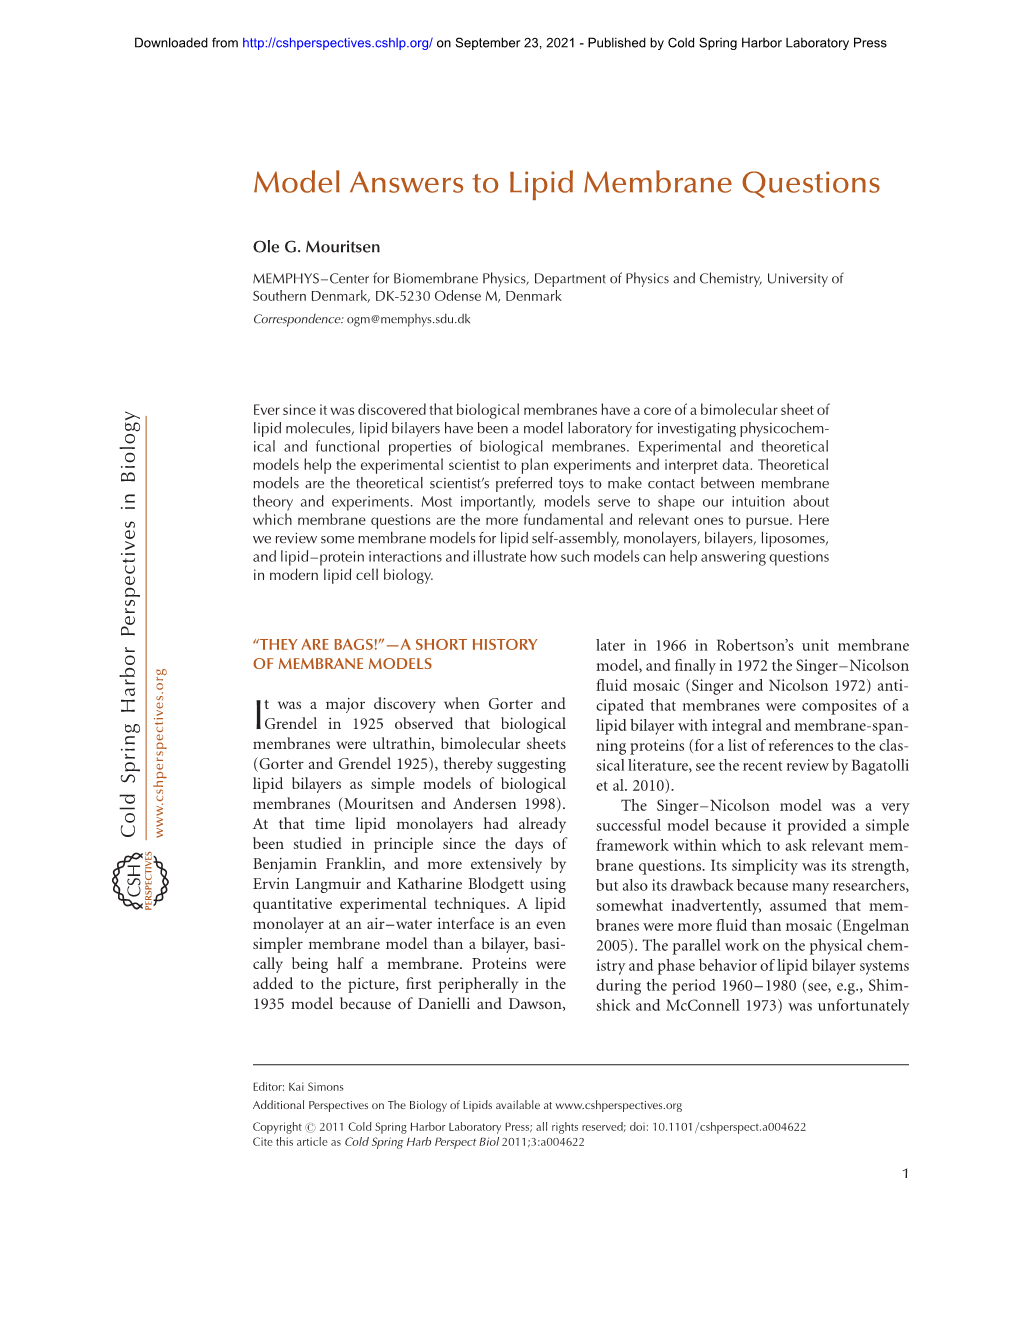 Model Answers to Lipid Membrane Questions